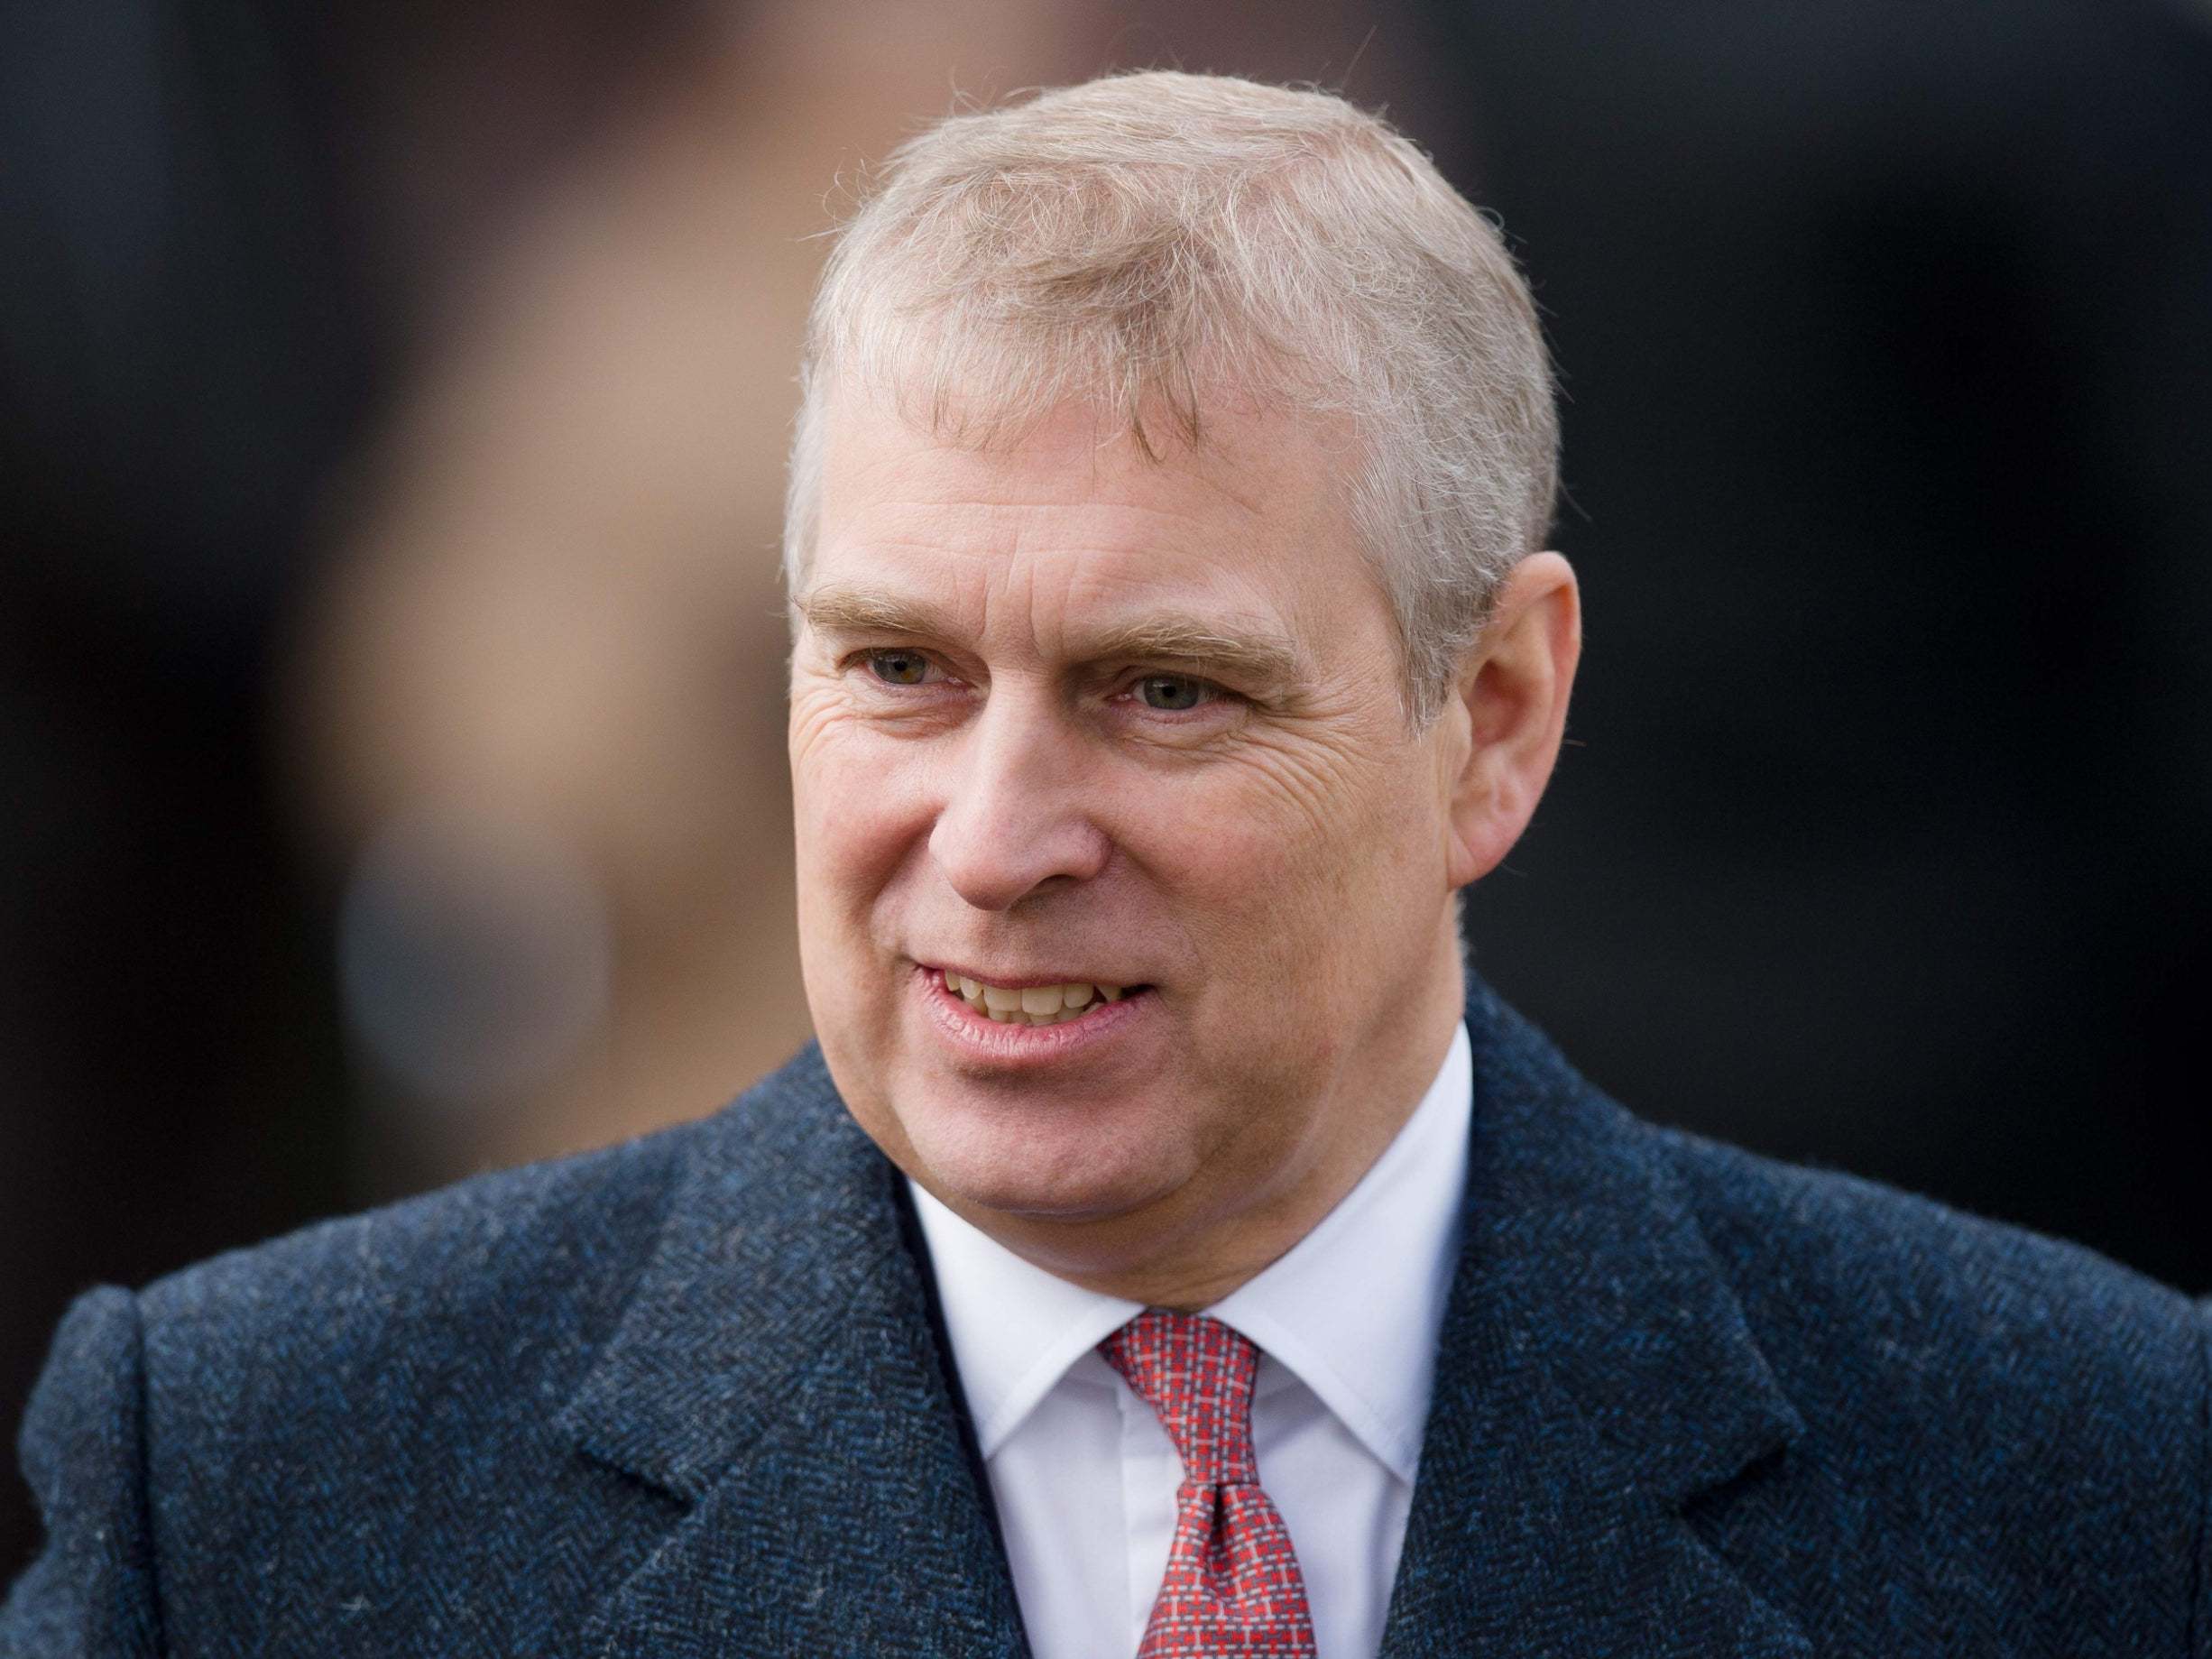 Prince Andrew 'received foot massage from young woman at Epstein apartment', report says